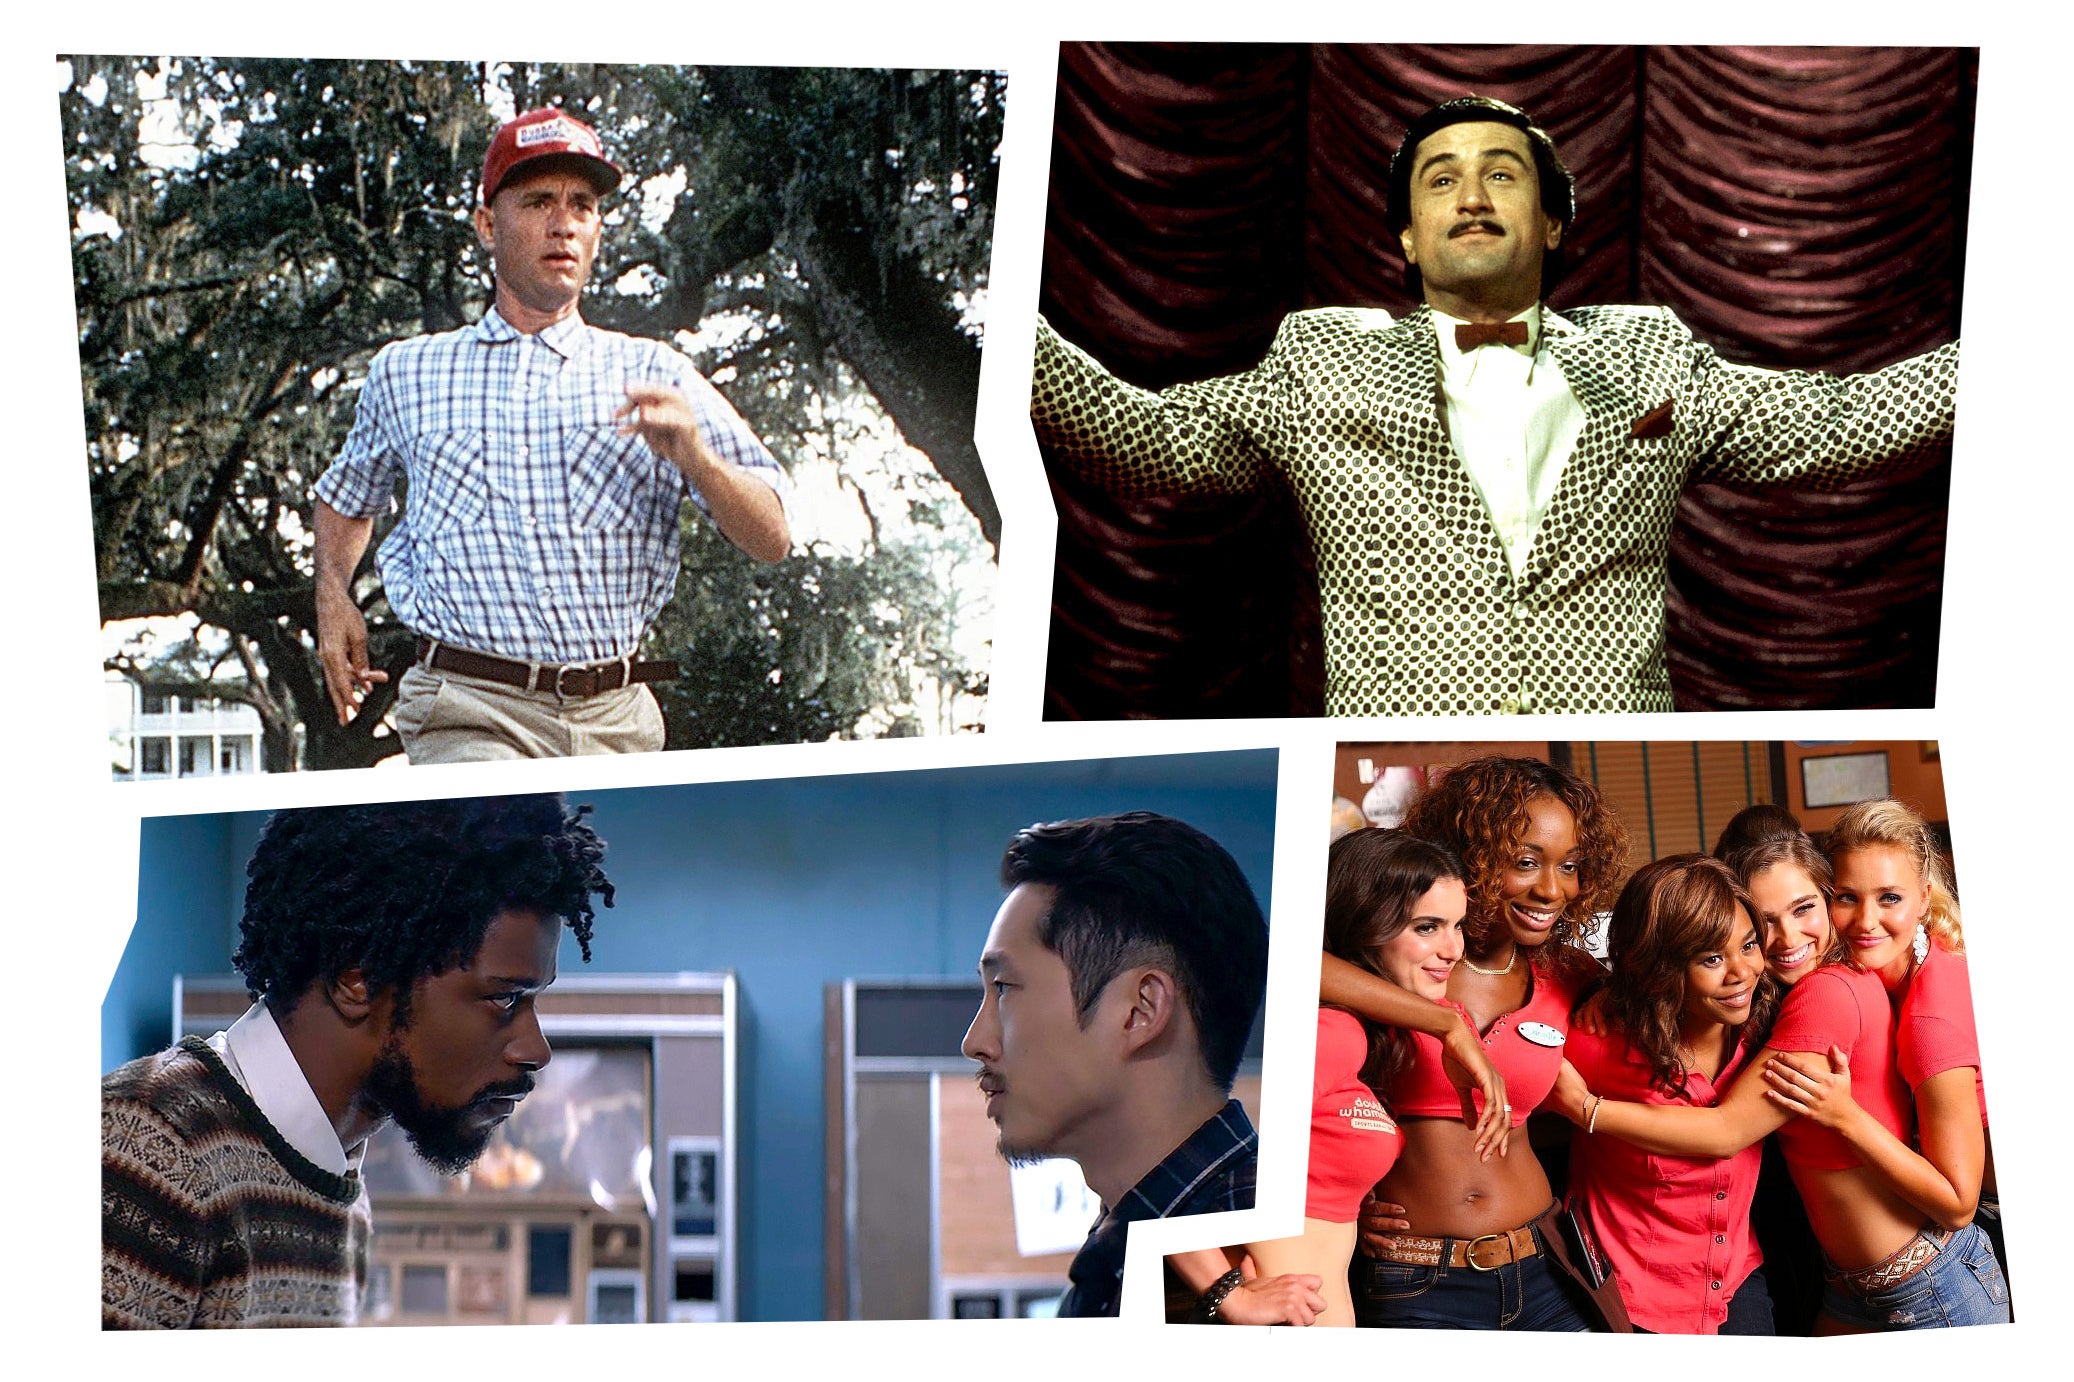 Clockwise: A still of Tom Hanks running in Forrest Gump, a still of Robert De Niro in front of a red velvet curtain in The King of Comedy, a still of Regina Hall and four other girls dressed in waitress uniforms in Support the Girls, and a still of LaKeith Stanfield talking to Steven Yeun in Sorry to Bother You. 